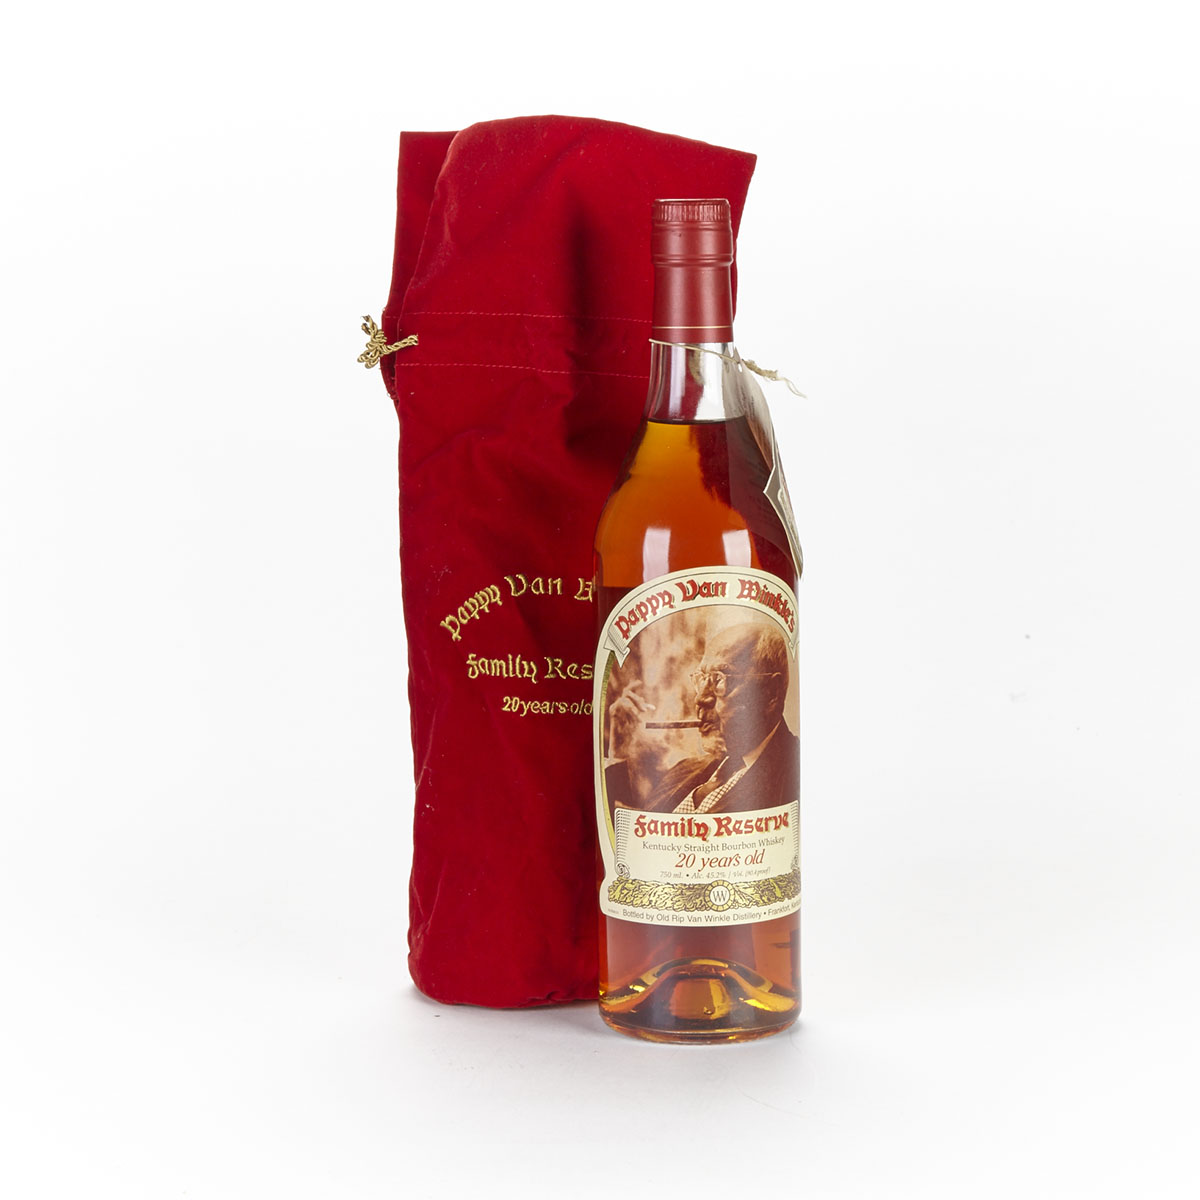 PAPPY VAN WINKLE’S FAMILY RESERVE 20 YEAR OLD KENTUCKY STRAIGHT BOURBON WHISKEY